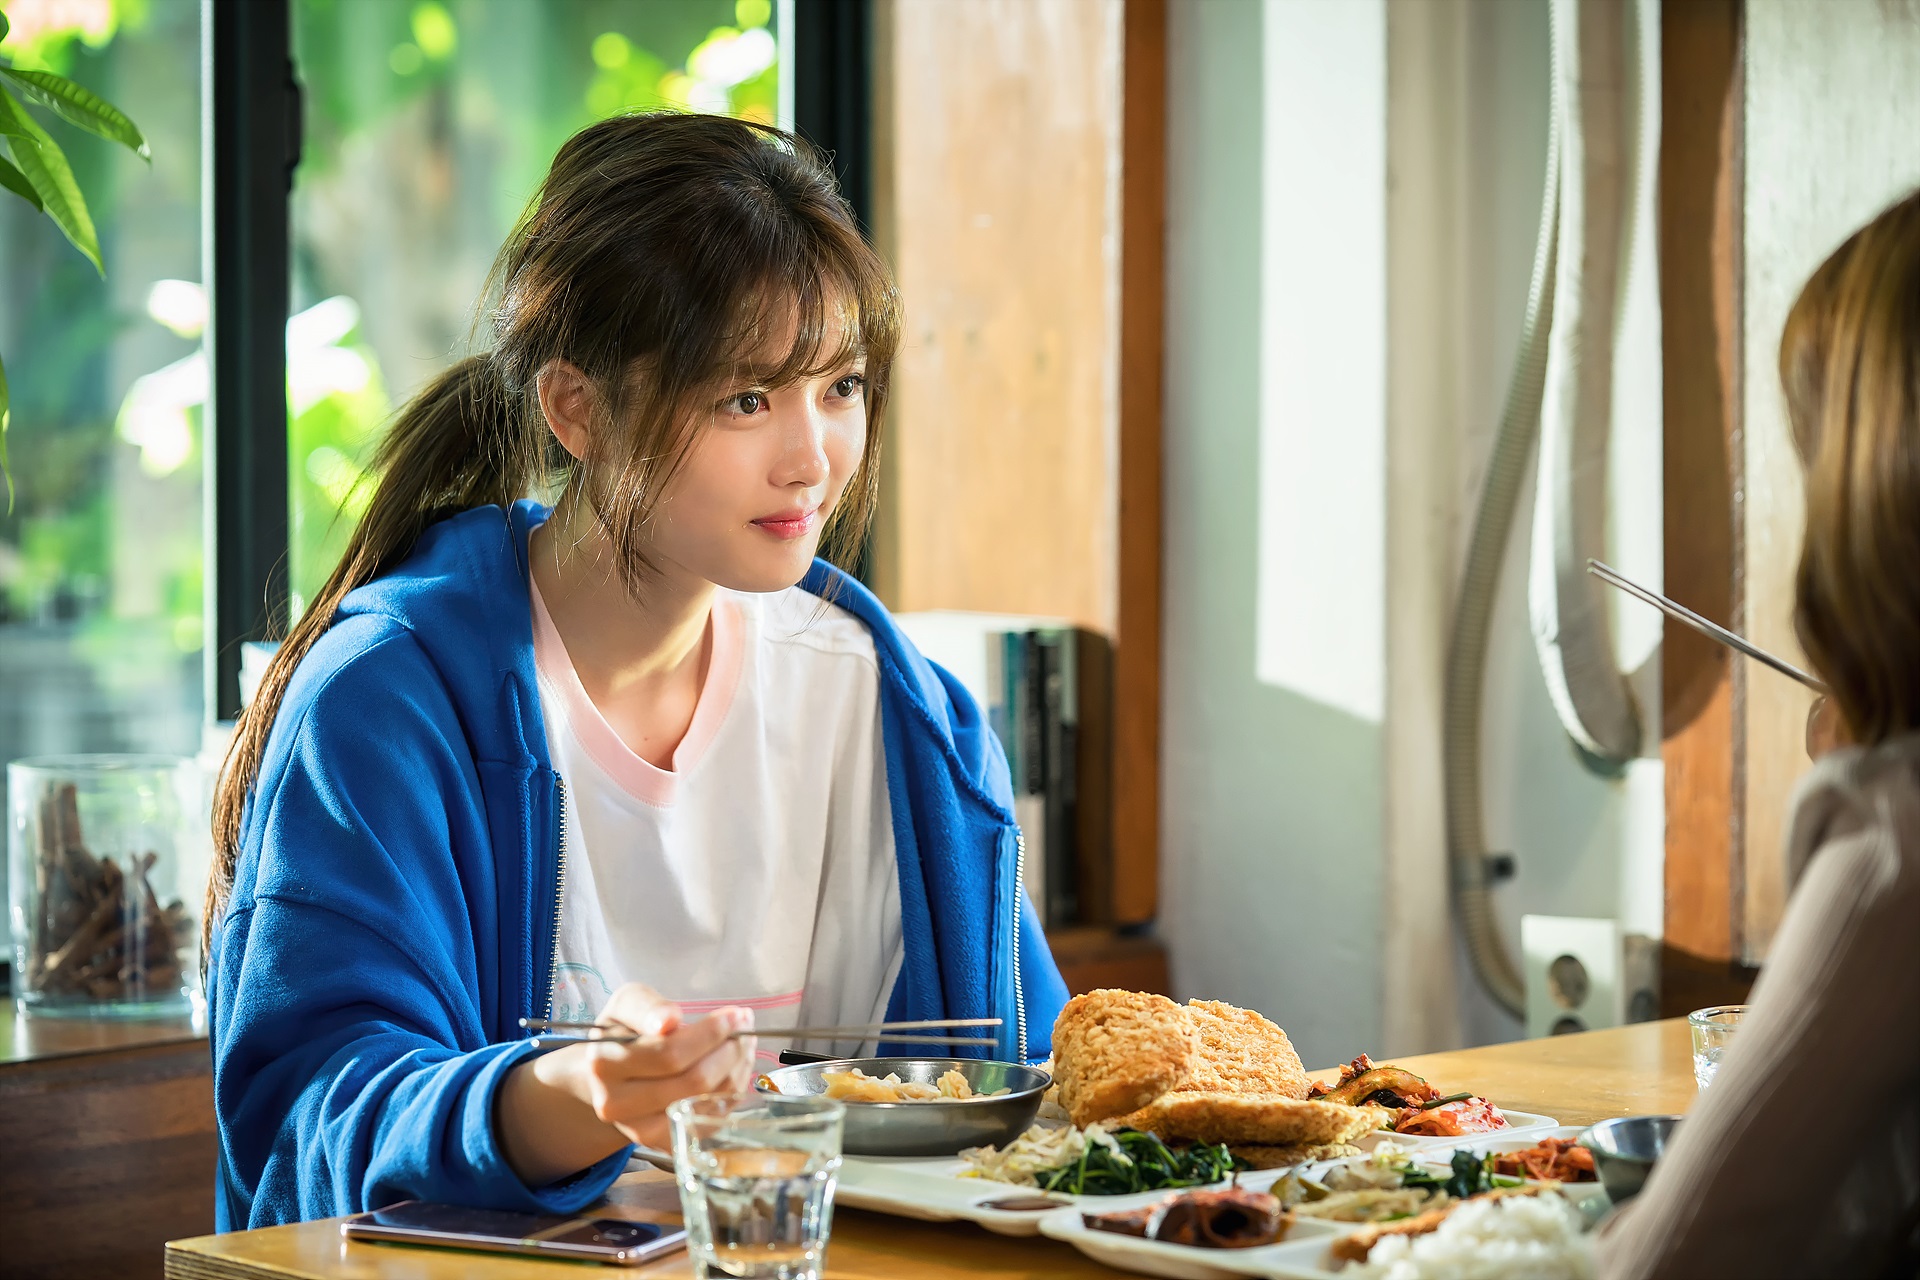 Kim Yoo-jung, who is once hot, spreads the Happy Virus with his previous only tear visuals and his broken hard carry activities.On November 22, JTBCs monthly drama, Once Cleaning Hot (director Noh Jong-chan, playwright Han Hee Young, production drama House, Oh Hyung-je), which will be broadcasted on November 26, unveiled a six-piece set featuring the ever-changing charm of the trusted actor Kim Yoo-jung, and fully anticipated the Kim Yoo-jung table Gil Osol. I pulled him up.It is a sterile-free healing romance that meets with CEO Jang Sun-gyeol (Yoon Gyun-sang), who is the most important cleaning company in cleanliness, and Kim Yoo-jung, the chief executive of Passion Manleb, who is ahead of cleanliness.Based on Dongmyeongs popular webtoon, we have completed the lineup that we believe in joining the actors such as Yoon Kyun-sang, Kim Yoo-jung, Song Jae-rim, Yoo Sun, Ahn Seok-hwan, Son Byung-ho, Kim Won-hae and Kim Hye-eun.Min Do-hee, who adds the vitality of the drama, and Kim Min-gyu, Hak-jin and Cha In-ha, who are the new generation with personality and acting ability, join as the Fairy of Cleaning and are responsible for the fun of the world.Kim Yoo-jung is at the center of the casting that has already been full of expectations.Kim Yoo-jung has been writing a myth of box office success by demonstrating the magic that makes imagination a reality in the work with the original work with excellent character digestion ability, irreplaceable charm, and no need for explanation.Especially, it adds meaning to the first work since it became an adult to clean up hot once.This is why Kim Yoo-jung, Gil Osol, which will be created as a real-life sniper youth empathy character, is waiting.To this end, Kim Yoo-jung has entered a perfect acting transformation.The photo shows the hot summer days of Kim Yoo-jung, who receives the trust of the production team as a broken-up Hot Summer Days.Kim Yoo-jung, who has a neck-stretched T-shirt and a rusty head, is a world-class Gil Osol itself.The sunshine smile that makes even the viewer happy can be seen as a charm of the gallant Gil Osol that does not get intimidated anywhere.Passion-filled jaw-mounted, which seems to be life-threatening, steals attention in a physical fitness test for joining the Cleaning Fairy run by Jang Sun-gyeol.In particular, Kim Yoo-jung, who runs without a heavy sack, stimulates curiosity about Gil Osol Character, a subject.From the octopus Mukbang of Naesungjero to the appearance of a horse-haired environmental cleaner who has been racing in a frenzy, he foresaw hard-carry activities with an infinite transformation.Gil Osol, a career seeker who is more likely to work for Passion Manleb than clean, is a figure who has become a luxury not only for love but also for cleanliness as she has been tapping on all the worlds alba with Cheongpo Women (a woman who gave up cleaning) whose knee-up reasoning has become a trademark.In order to create Gil Osol as a realistic figure who sympathizes with him, Kim Yoo-jung is creating a lively character as Hot Summer Days who do not buy himself at the shooting scene.Kim Yoo-jungs transformation, which will show his unlimited acting by adding a friendly and cheerful appearance to his unique loveliness, is expected.The production team of Clean Up Once Hot said, I feel that the person named Gil Osol has become more perfect when he meets Kim Yoo-jung.Kim Yoo-jung, so I thought it was a possible character, so I realized it vividly.Passion, which does not miss minor details, makes it possible to transform infinitely, he praised, and stimulated expectations that he would be able to confirm Kim Yoo-jungs hard carry performance.On the other hand, director Roh Jong-chan, who was recognized for his sensual production in Preparation for acquisition and War of the Palace Cruelty - Flowers based on Dongmyeongs webtoon, and Han Hee Jeong, a Korean gunman, coincided.It will be broadcast first on JTBC at 9:30 pm on November 26th (Month) following Beauty Inside.Netizens are expected to Yu-Jeong act through various SNS and portal sites.Character also digests with a lot of charms,  Yu-Jeong Actor Fighting , I wanted to see Yu-Jeong , I should use my own room.It seems to be fun. iMBC  Photo Drama House, Oh Hyung-je